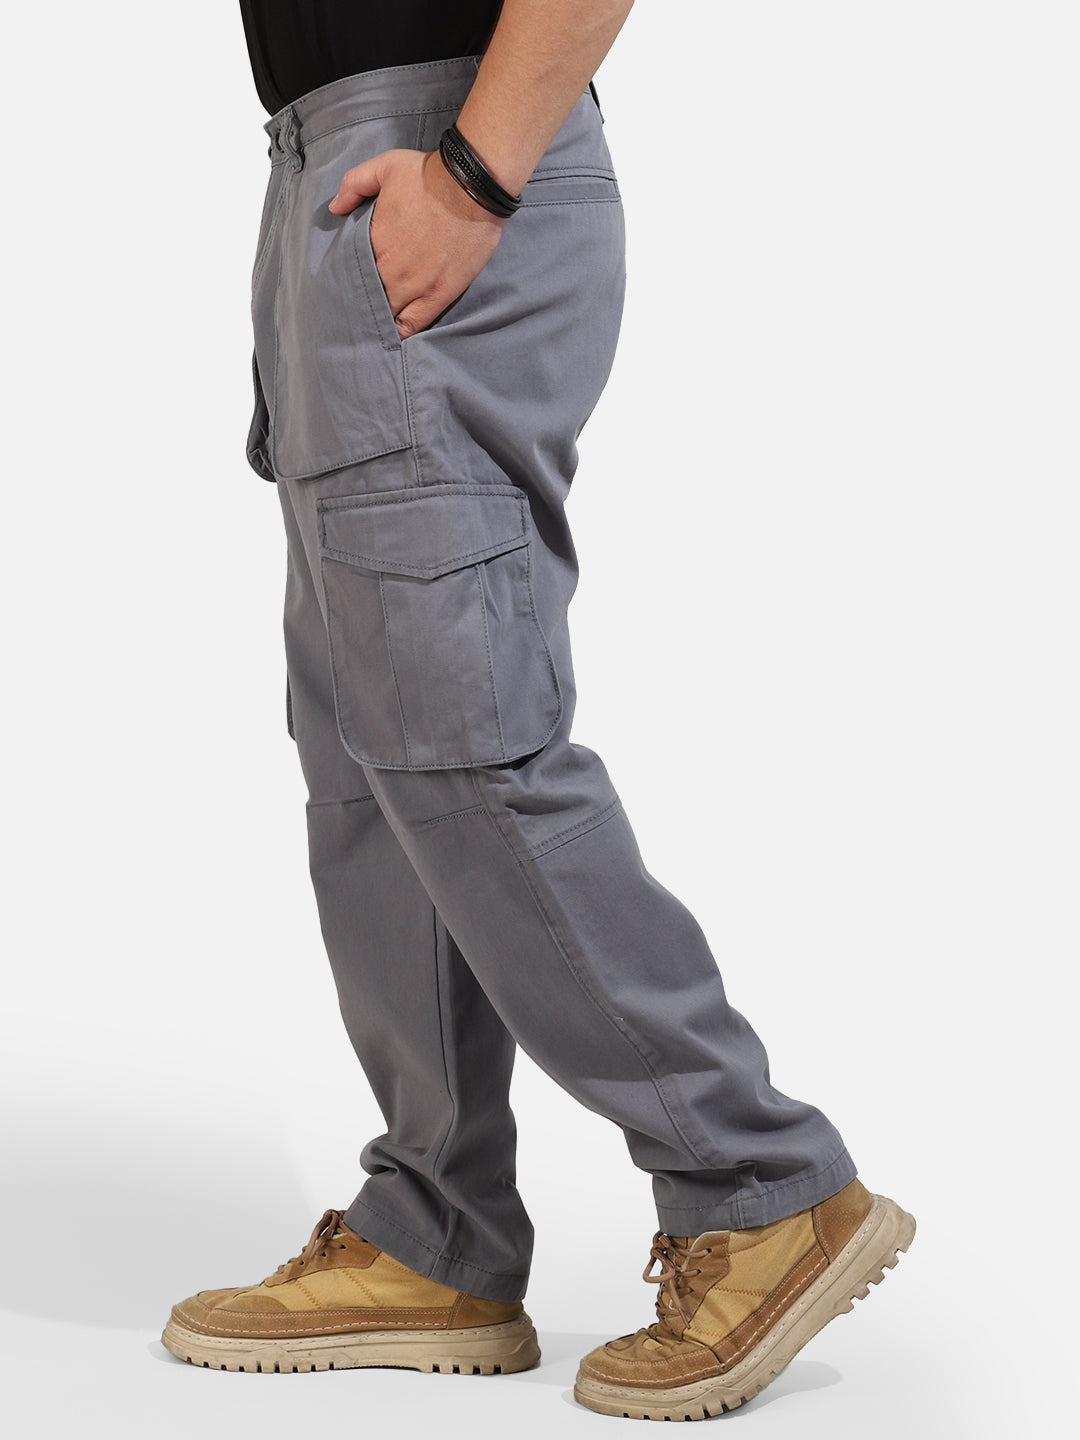 Ash Grey Cotton Twill Tactical Baggy Fit Cargo